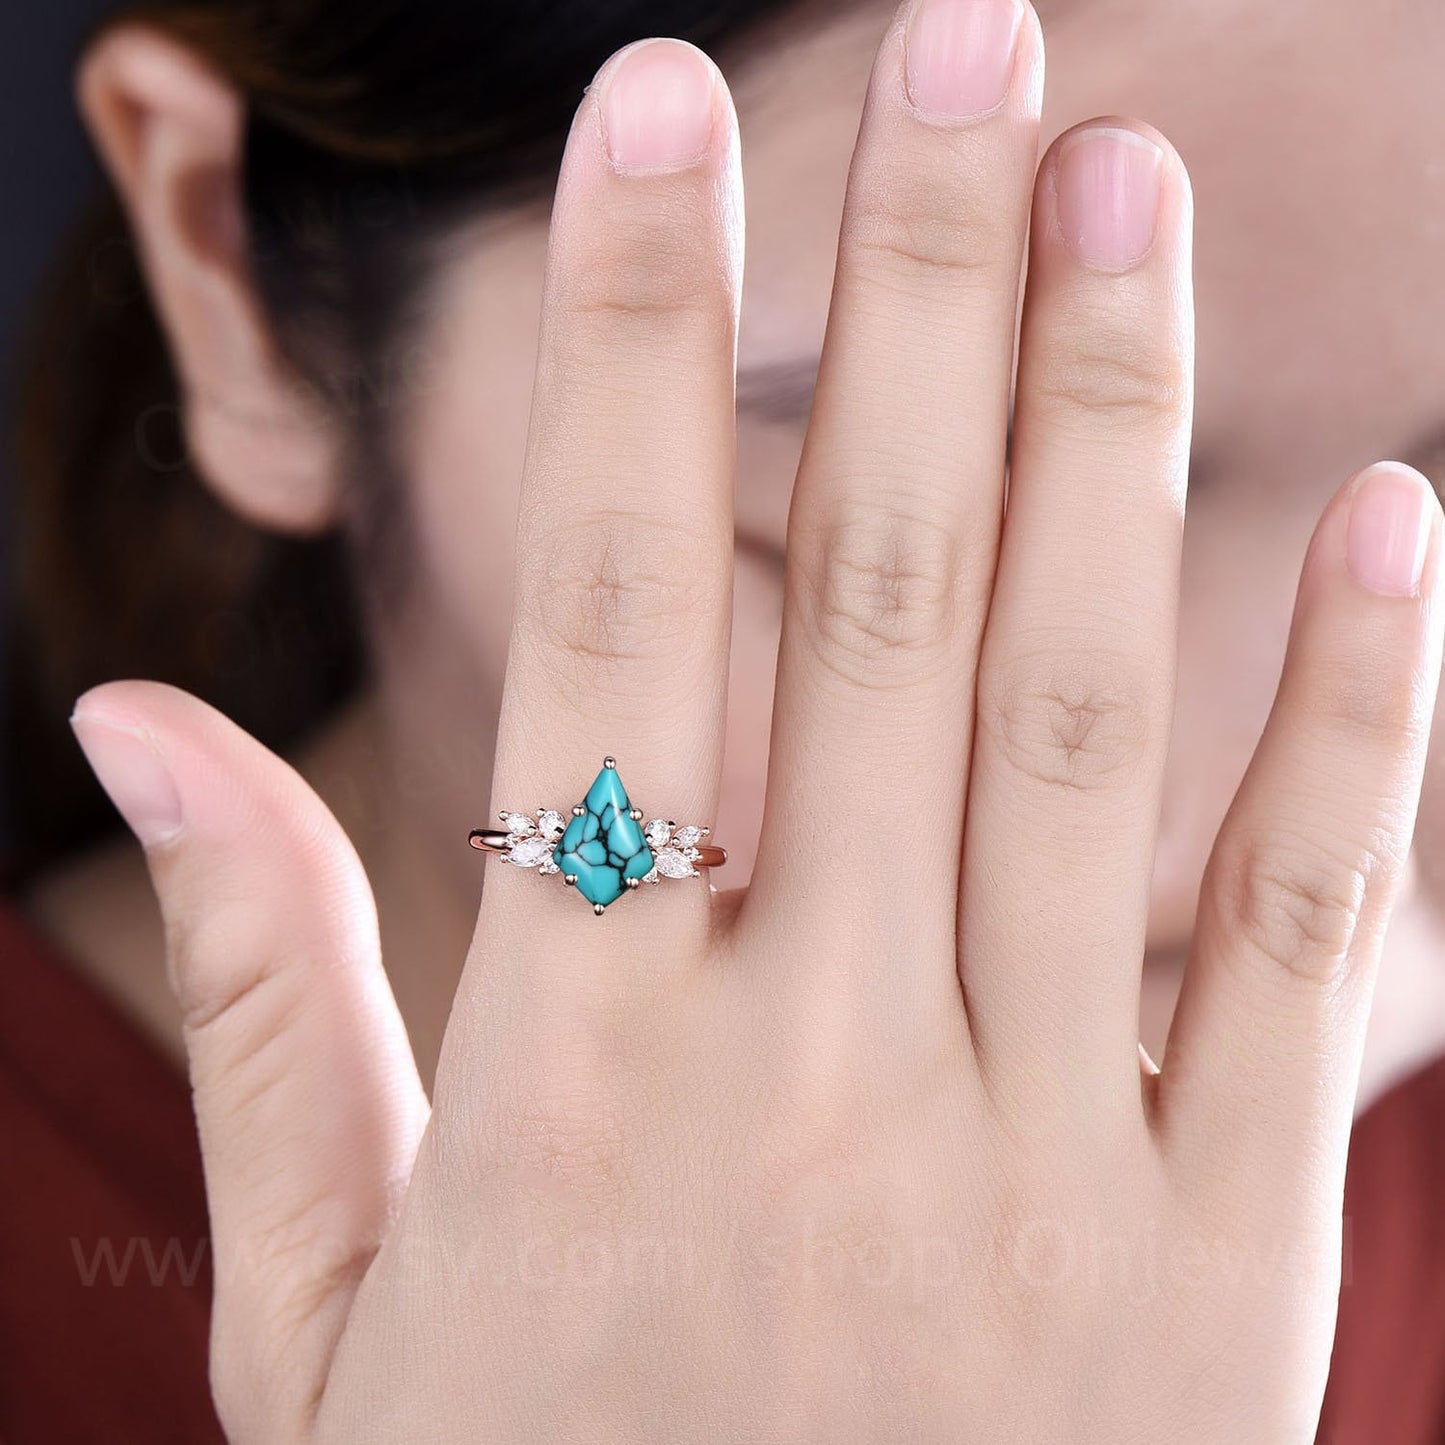 Kite natural Turquoise ring gold vintage unique engagement ring 6 prong cluster marquise cut diamond promise wedding ring for women gift